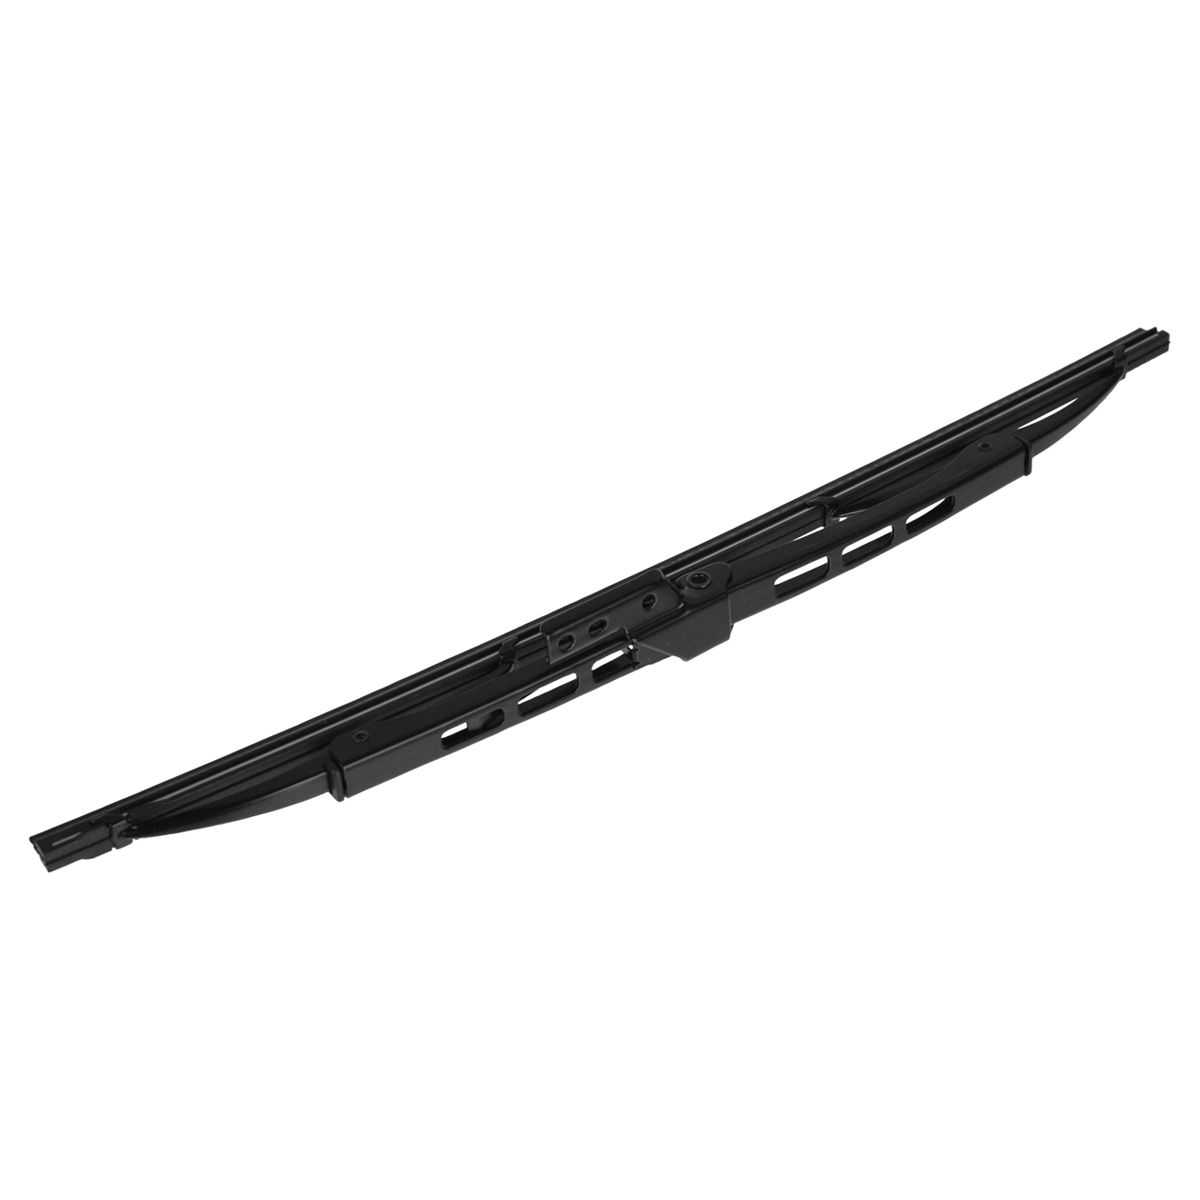 OEM 8524235010 Wiper Blade Assembly Back Glass Rear for 96-02 Toyota 4Runner | eBay 2001 Toyota 4runner Rear Wiper Blade Replacement